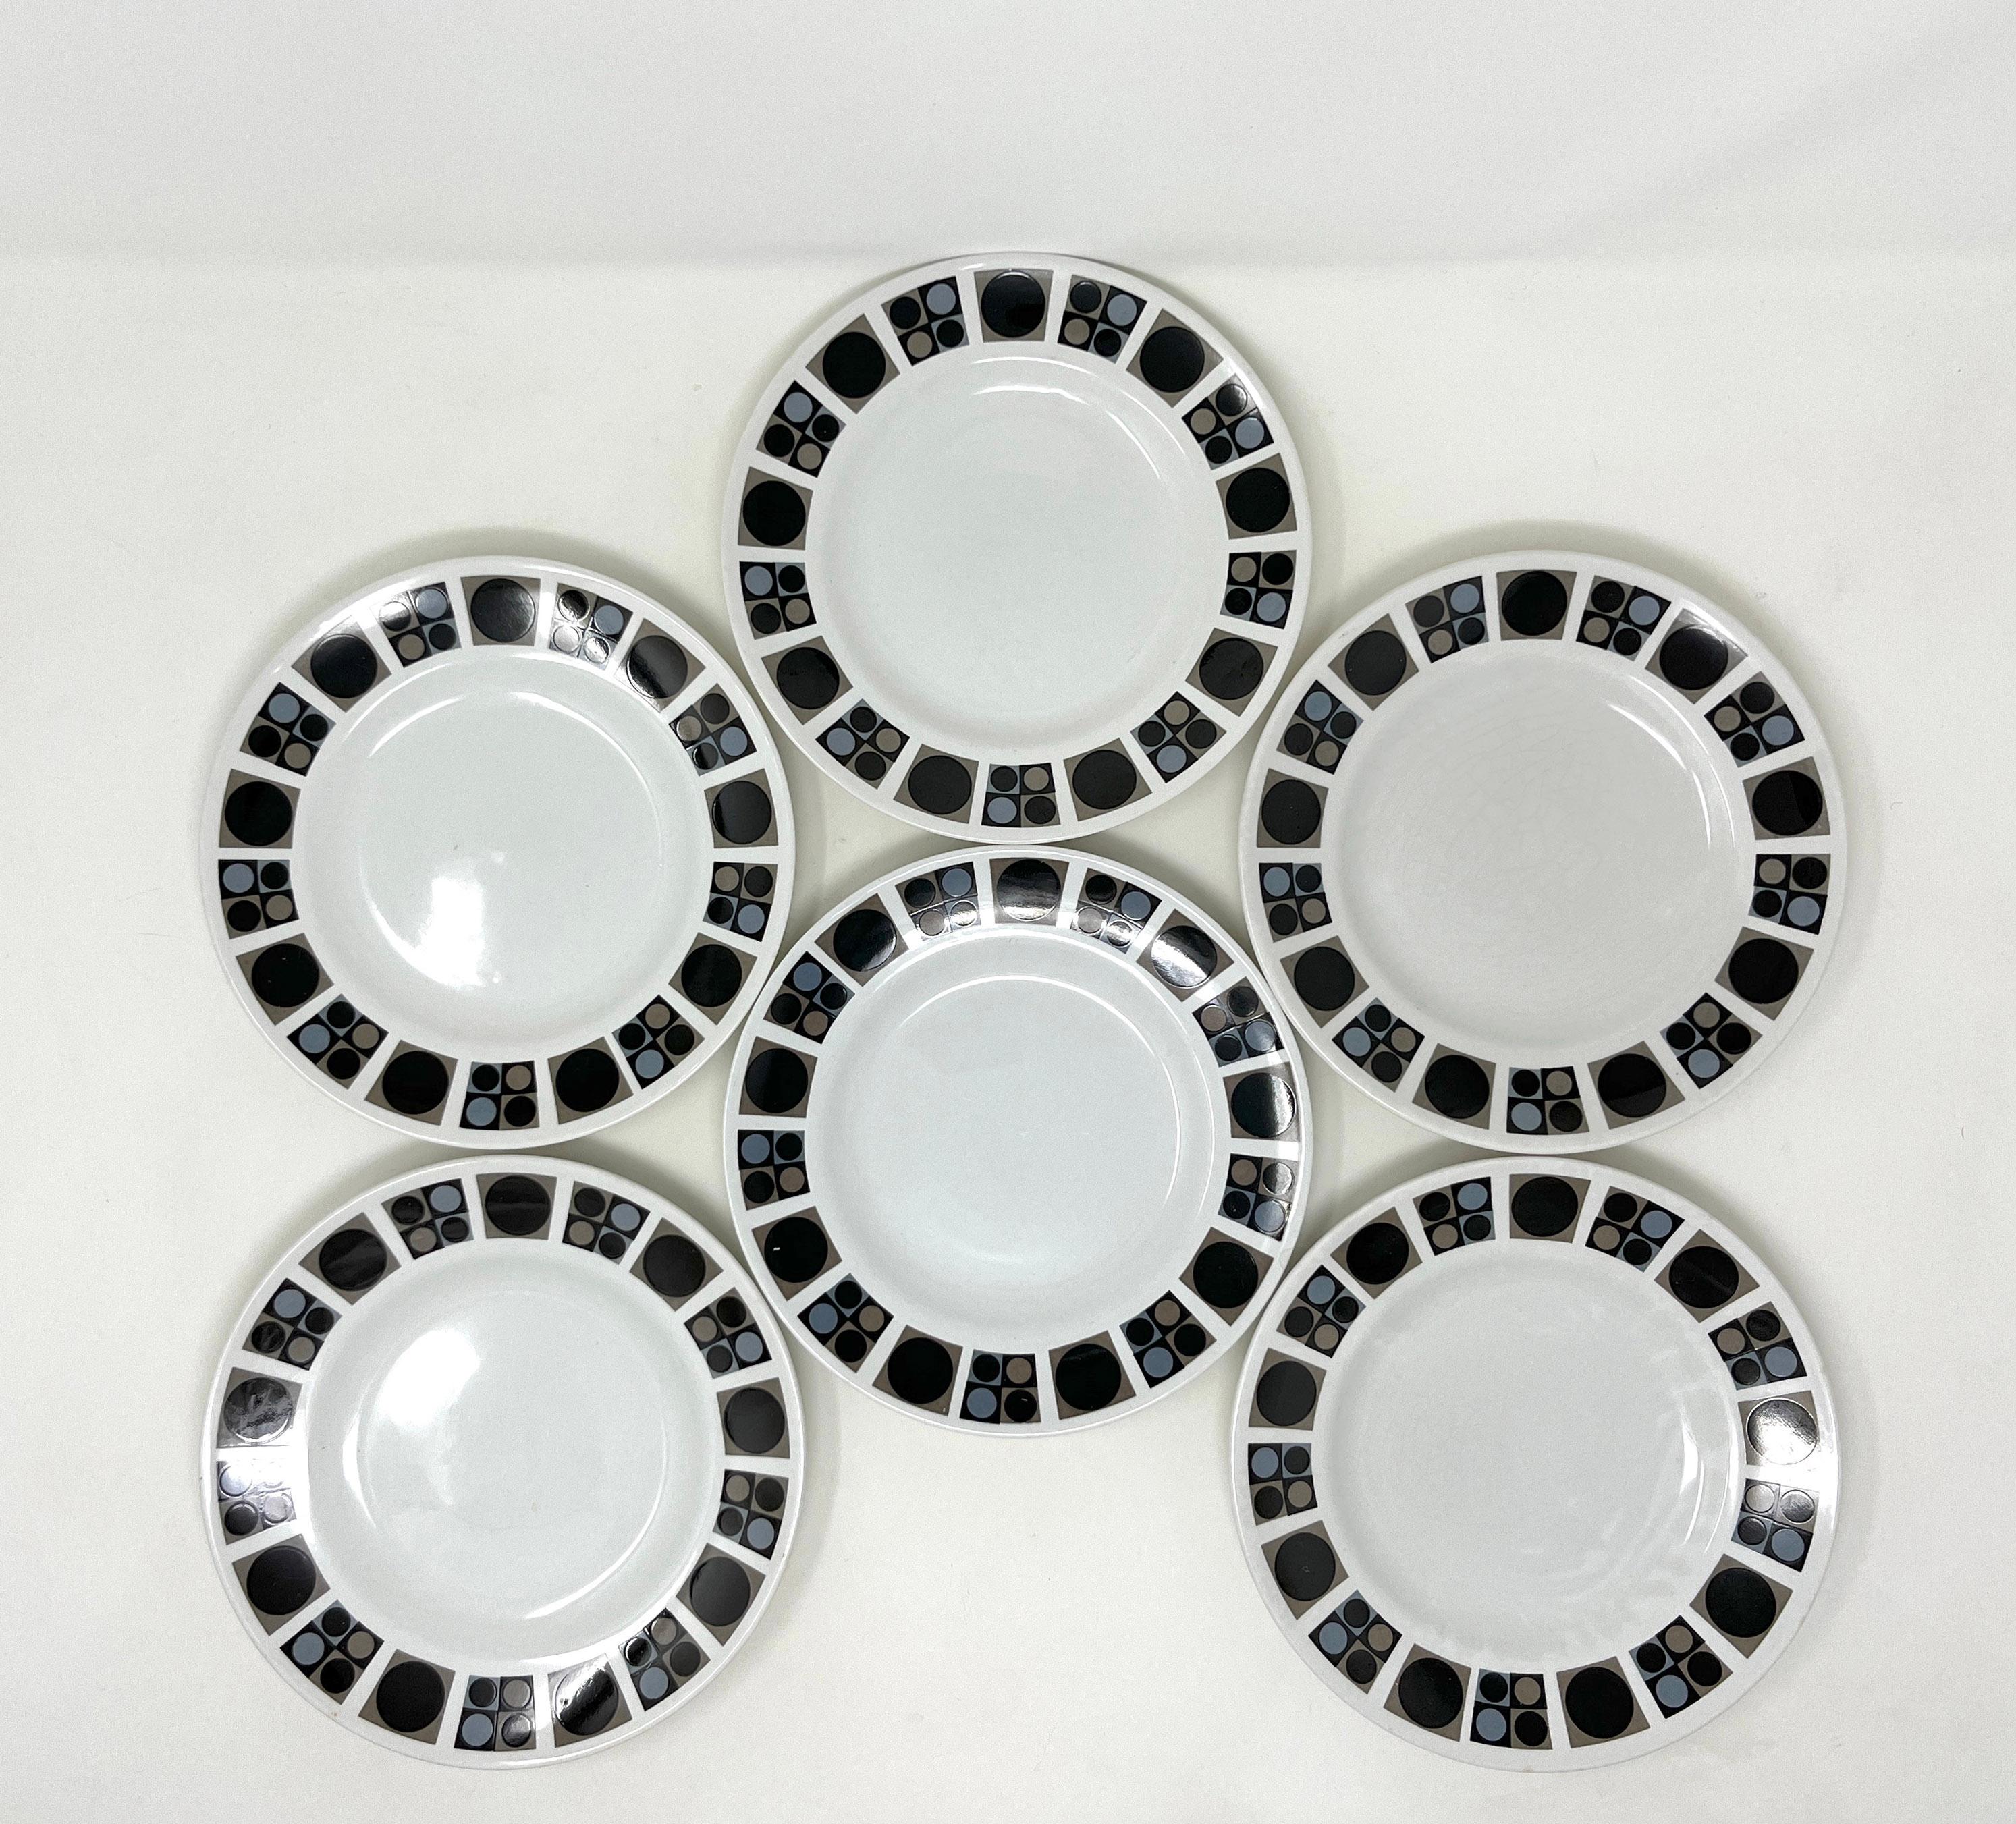 Set of 6 English earthenware tea plates with printed overglaze decoration in the 'Focus' pattern. Made by W. R. Midwinter Ltd., Burslem, England, 1964.

The broad rims are decorated with panels of single or four circles in brown, black and